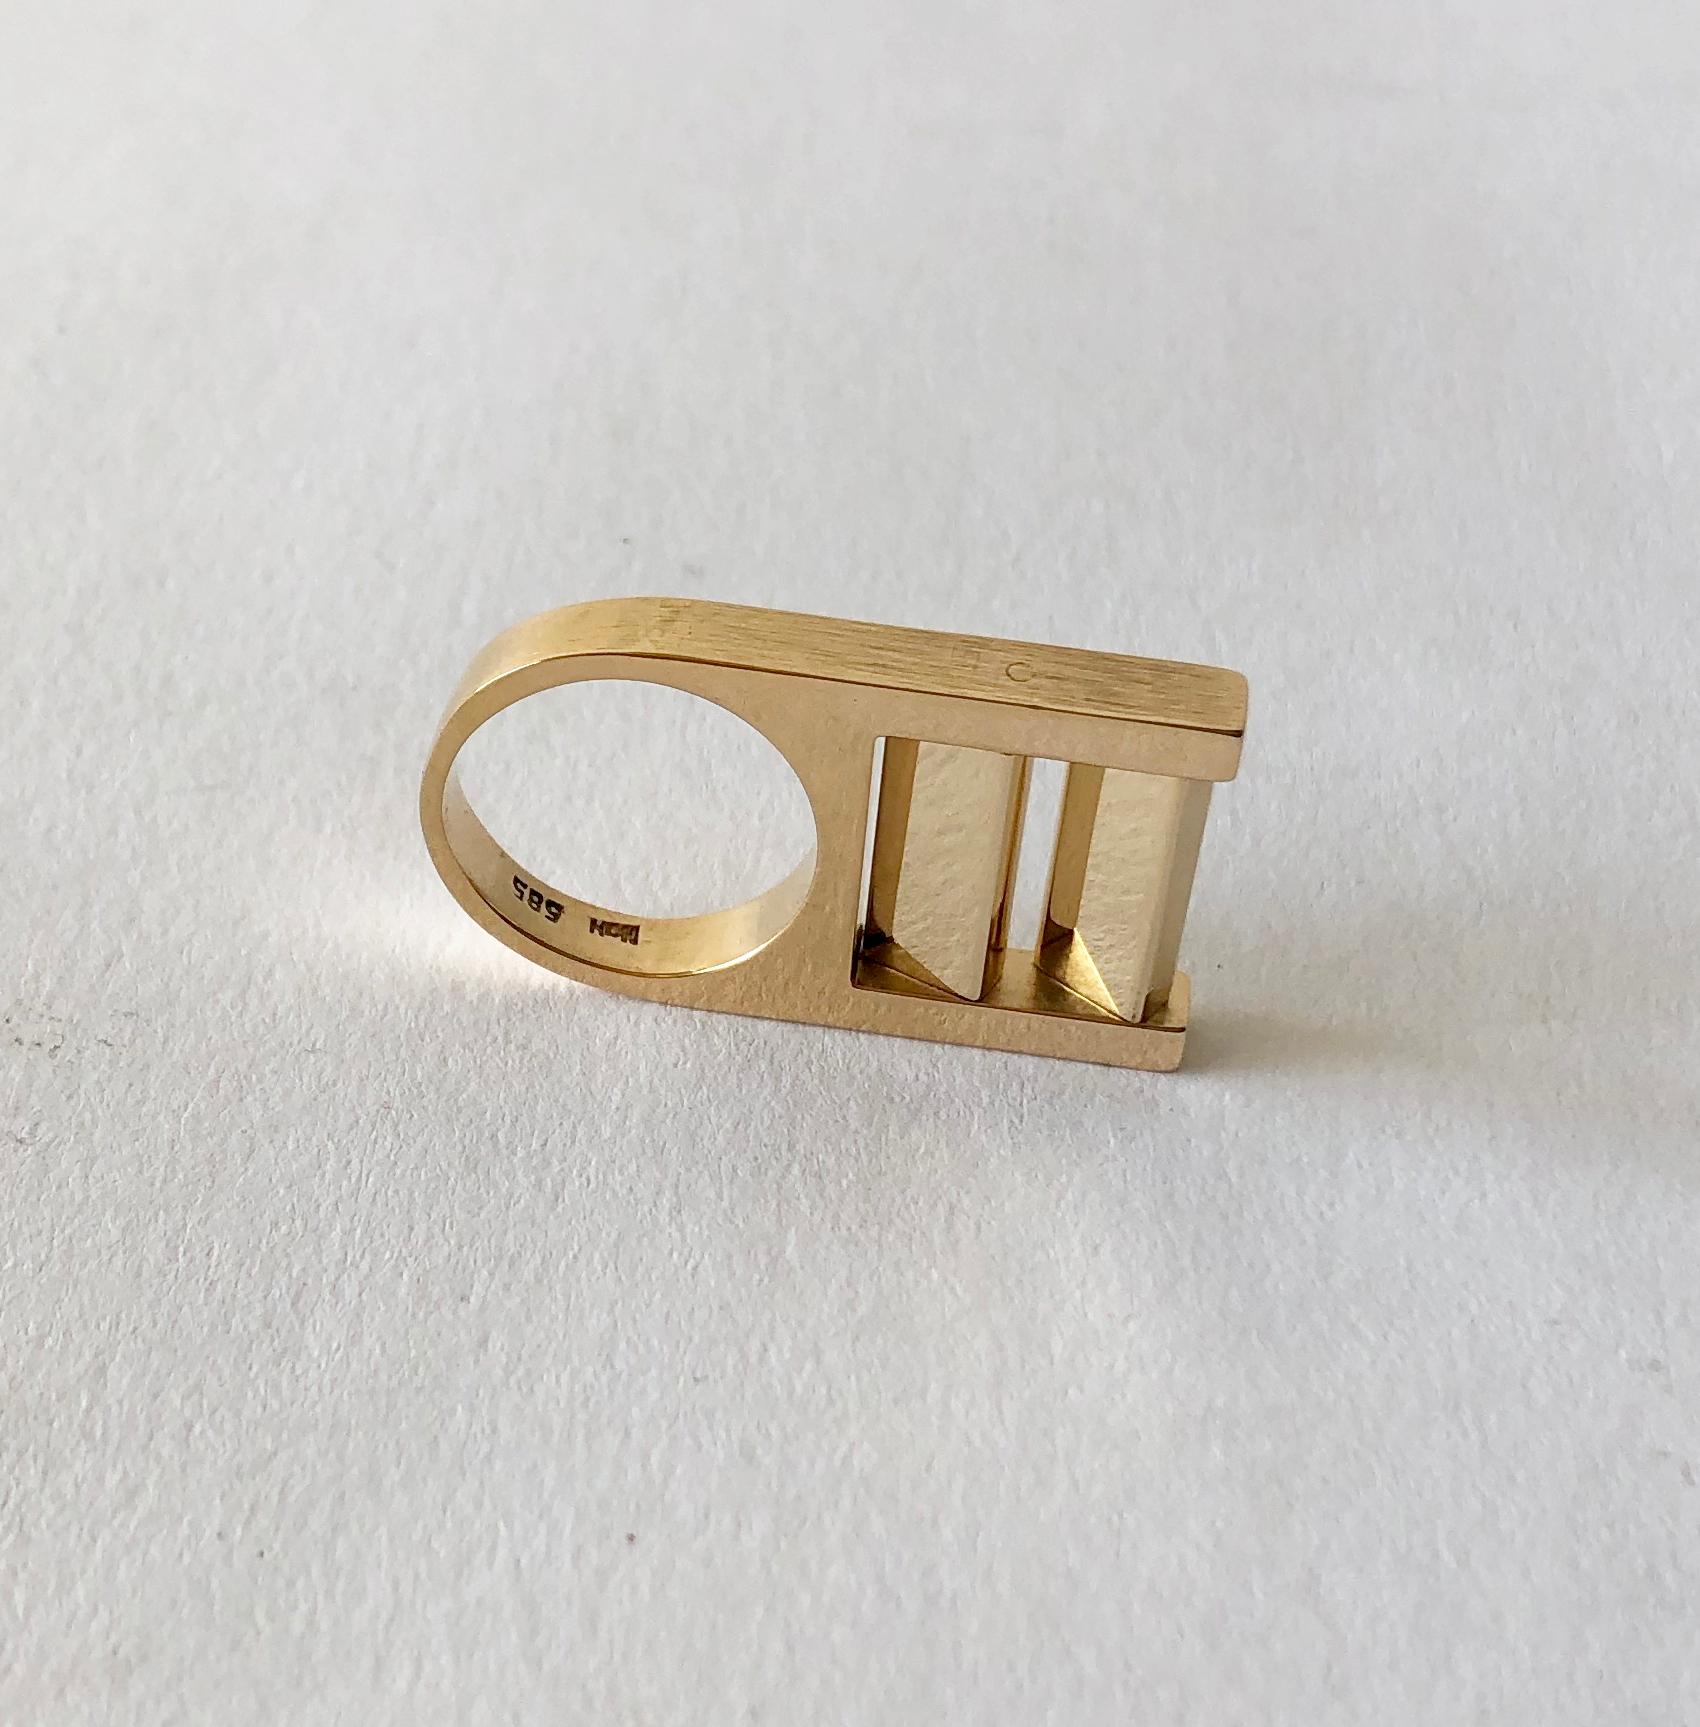 Danish modern 14K gold kinetic ring created by Hans Hansen, circa 1970's.  Ring is a finger size 5 - 5.5 and is signed HaH, 585.  In very good vintage condition.  